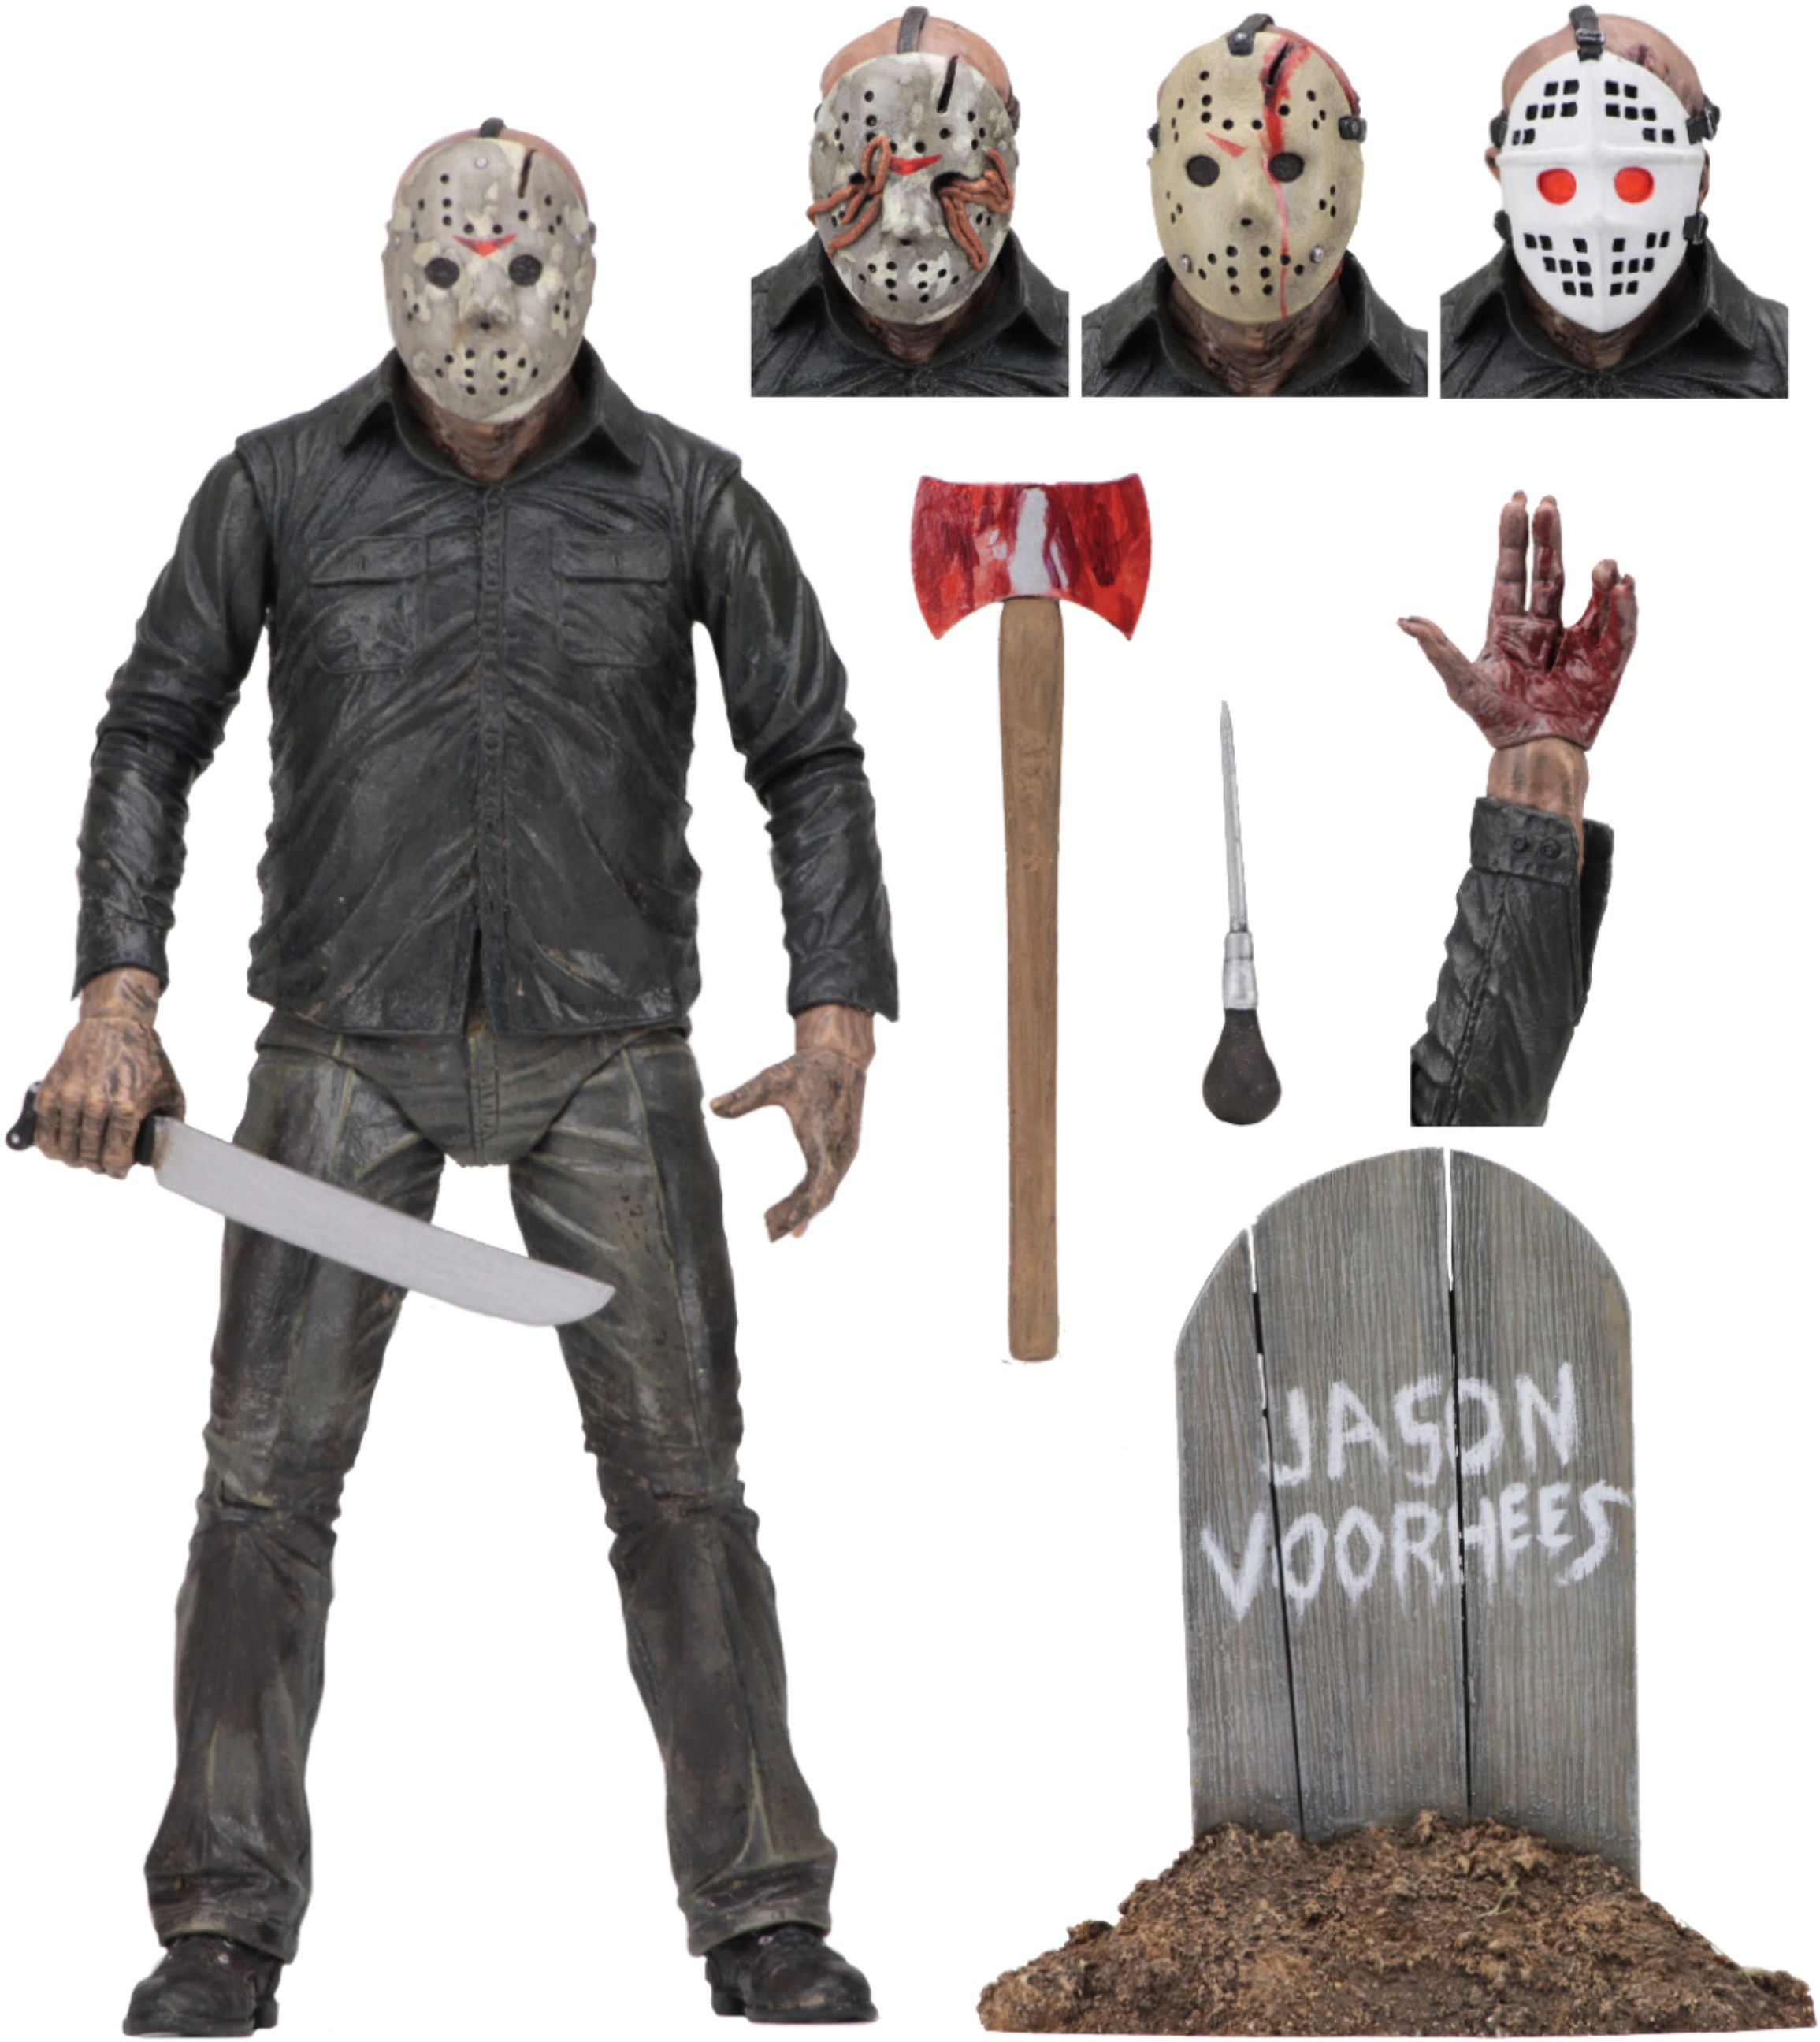 7” Scale Action Figure NECA Friday the 13th Ultimate Part 6 Jason Voorhees 